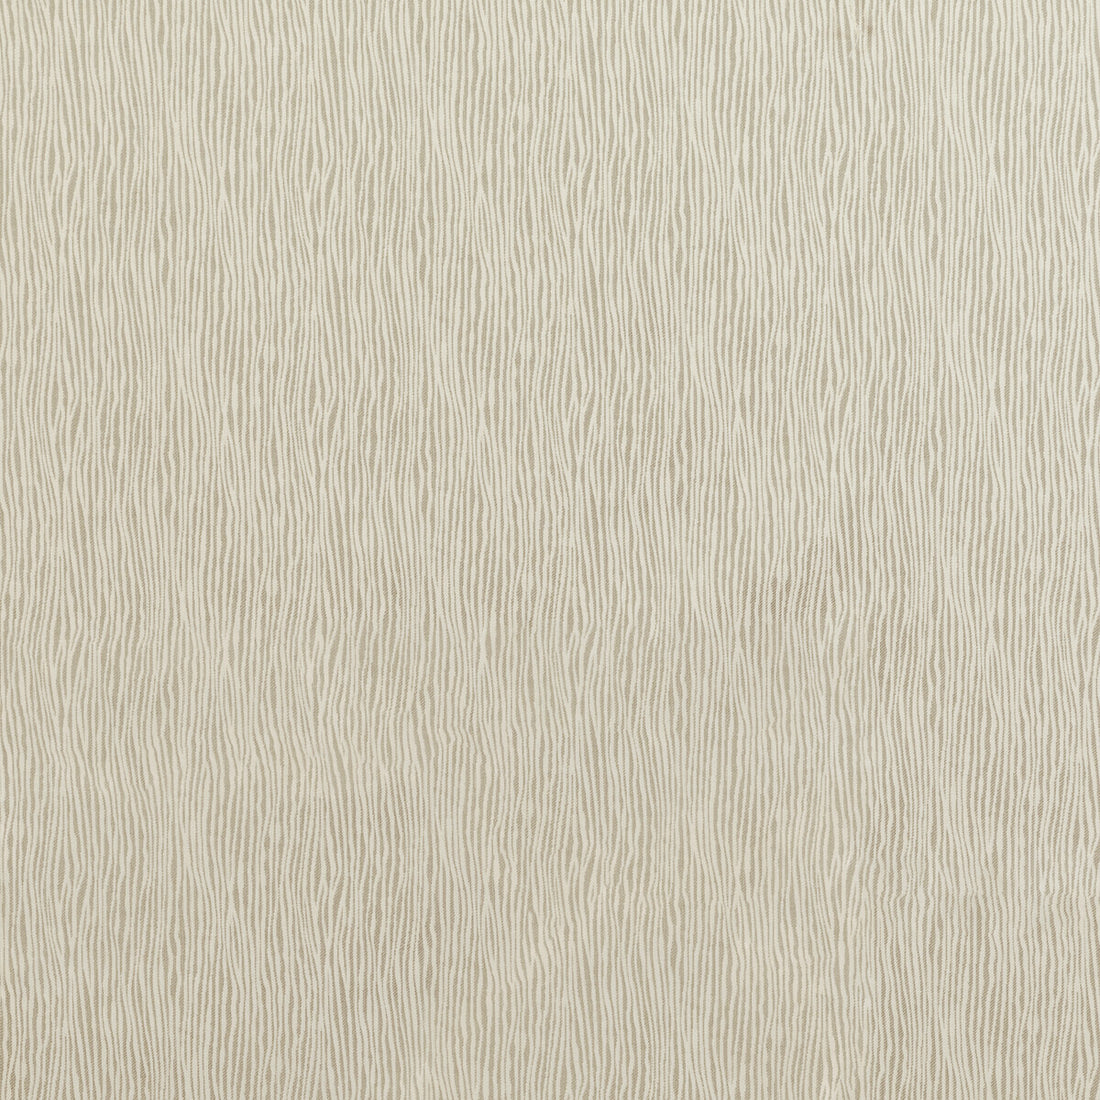 Stringer fabric in linen color - pattern 35058.16.0 - by Kravet Basics in the Monterey collection